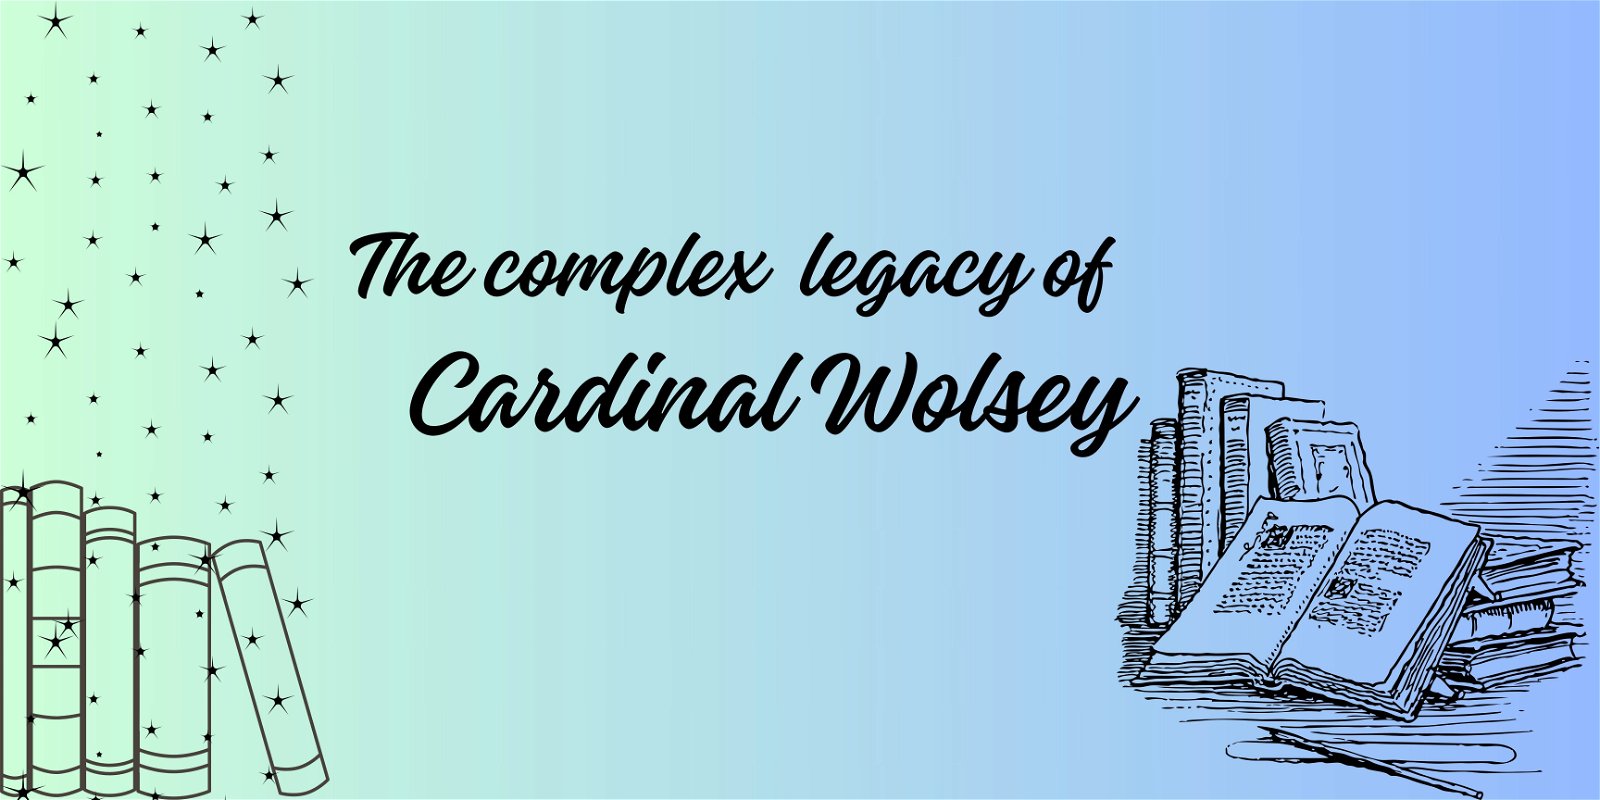 The complex legacy of Cardinal Wolsey